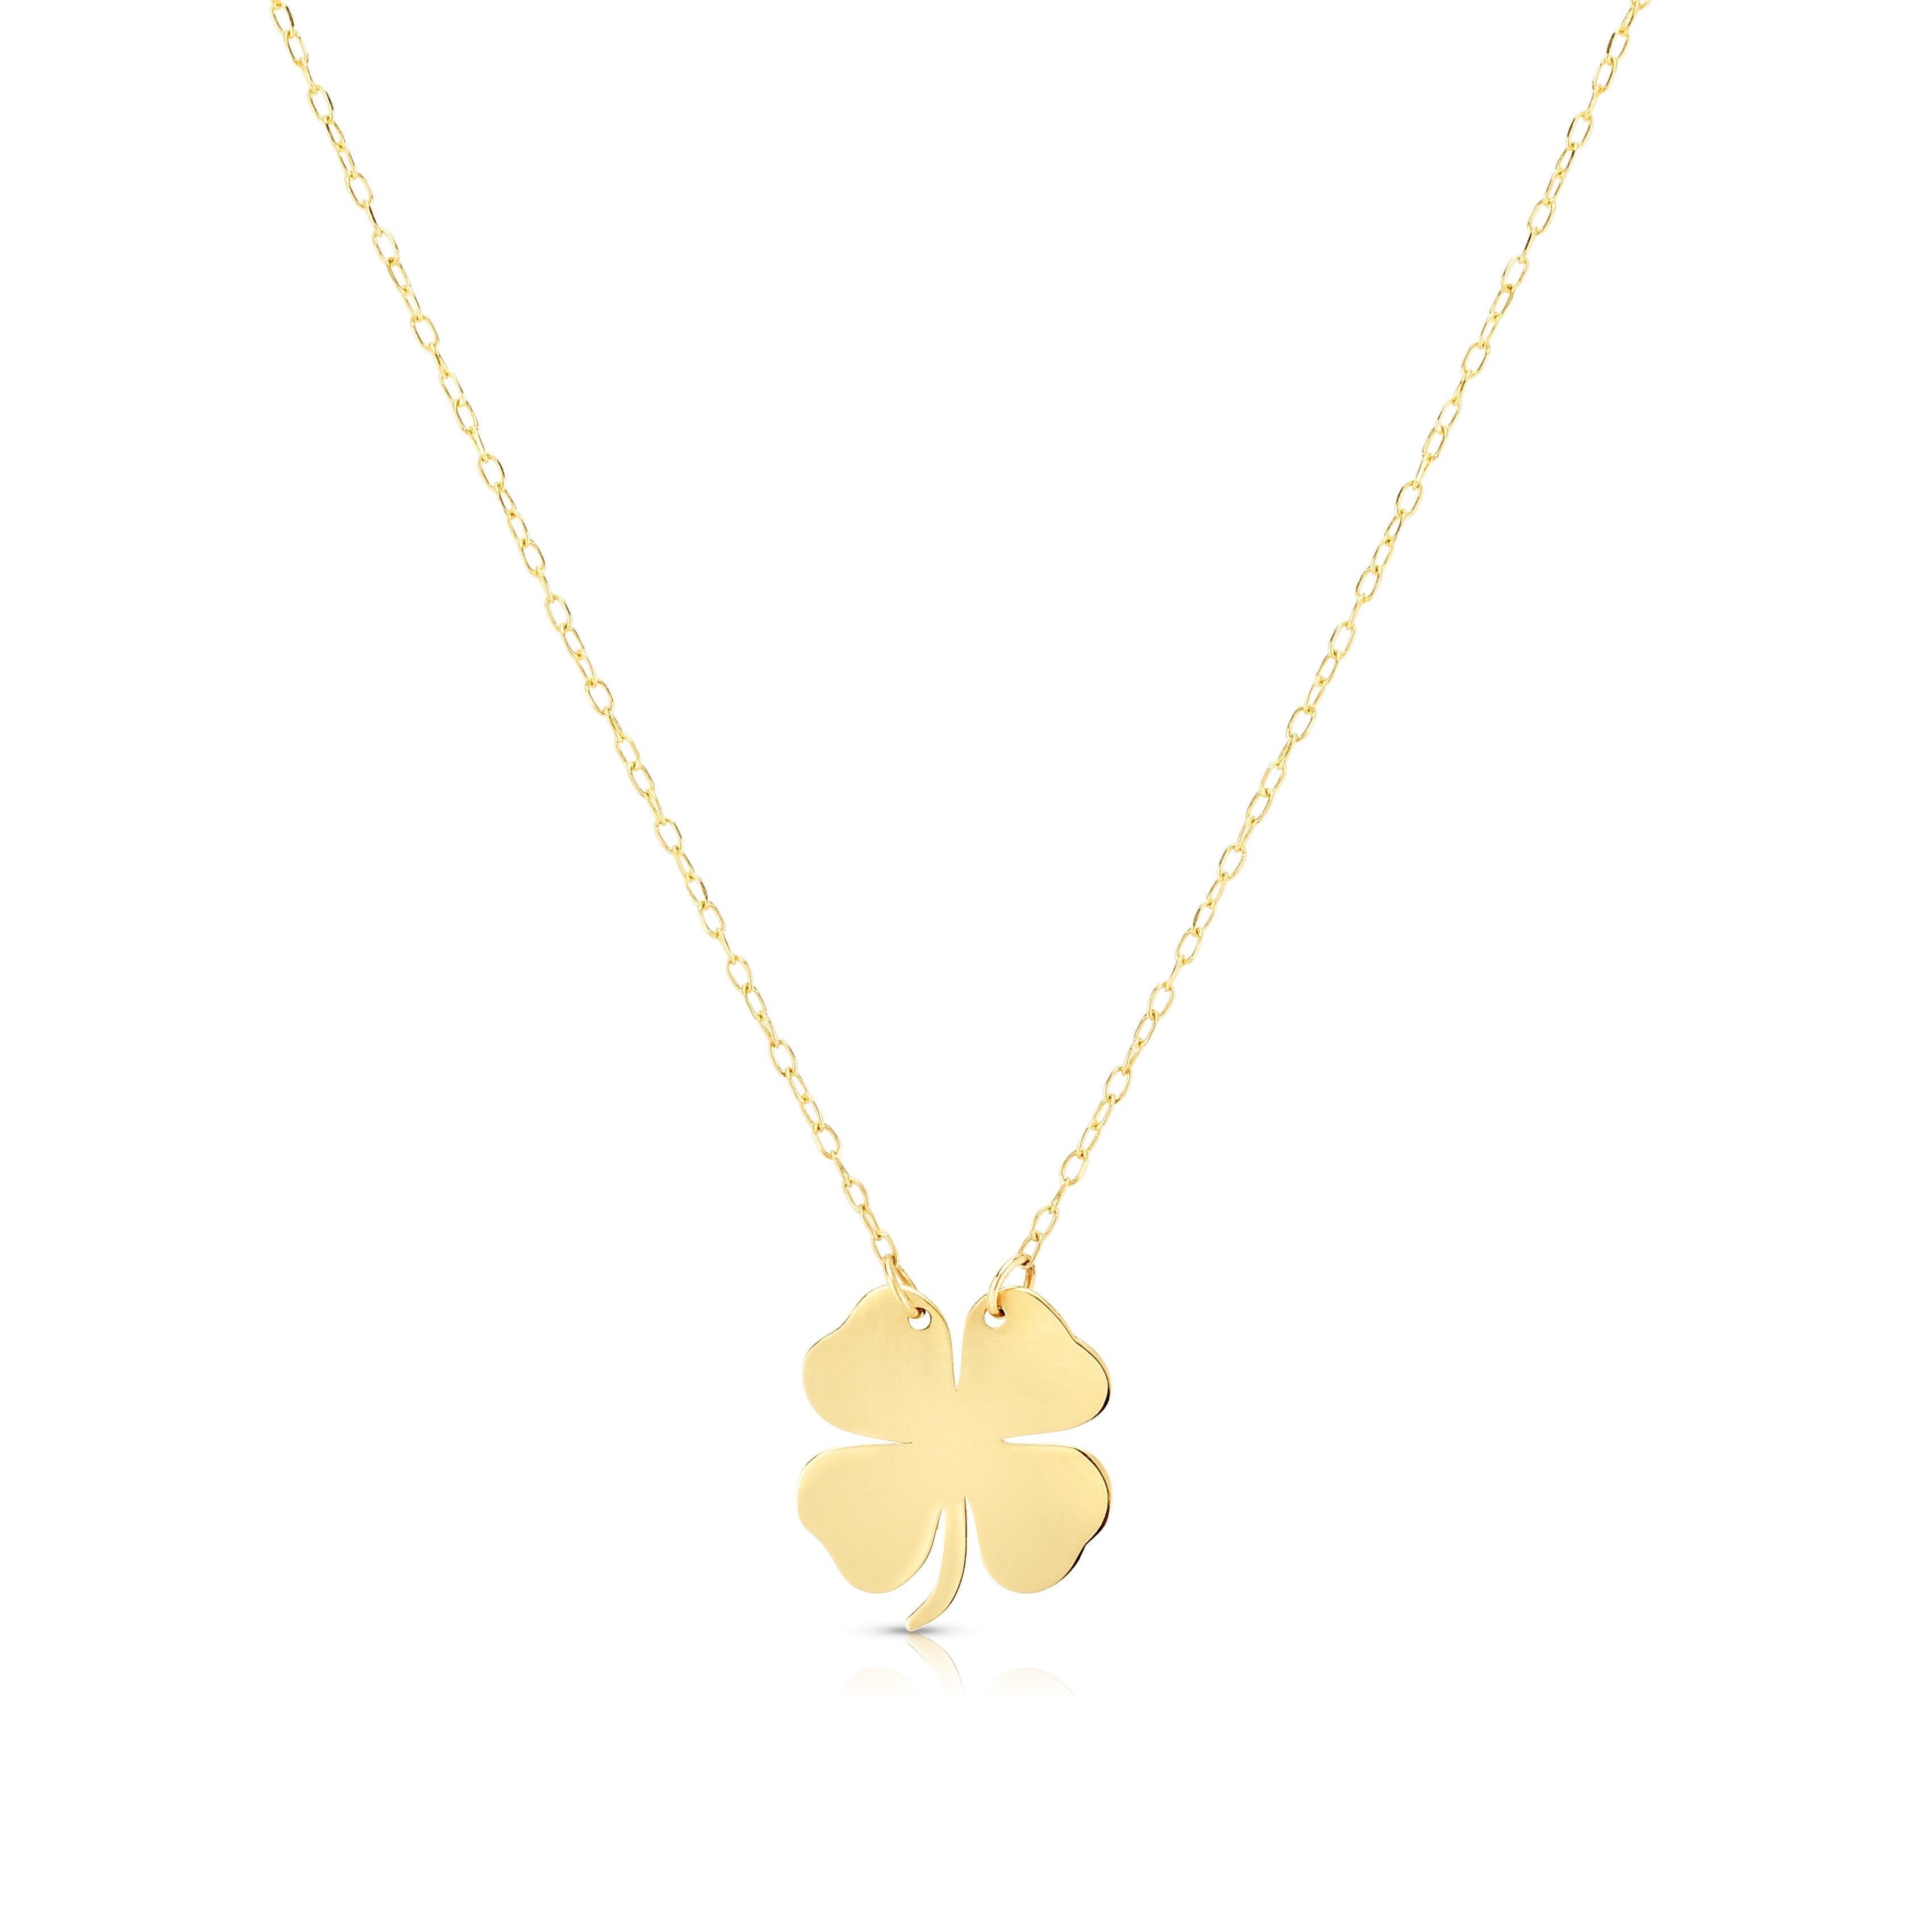 Clover Necklace with Spring Ring Clasp